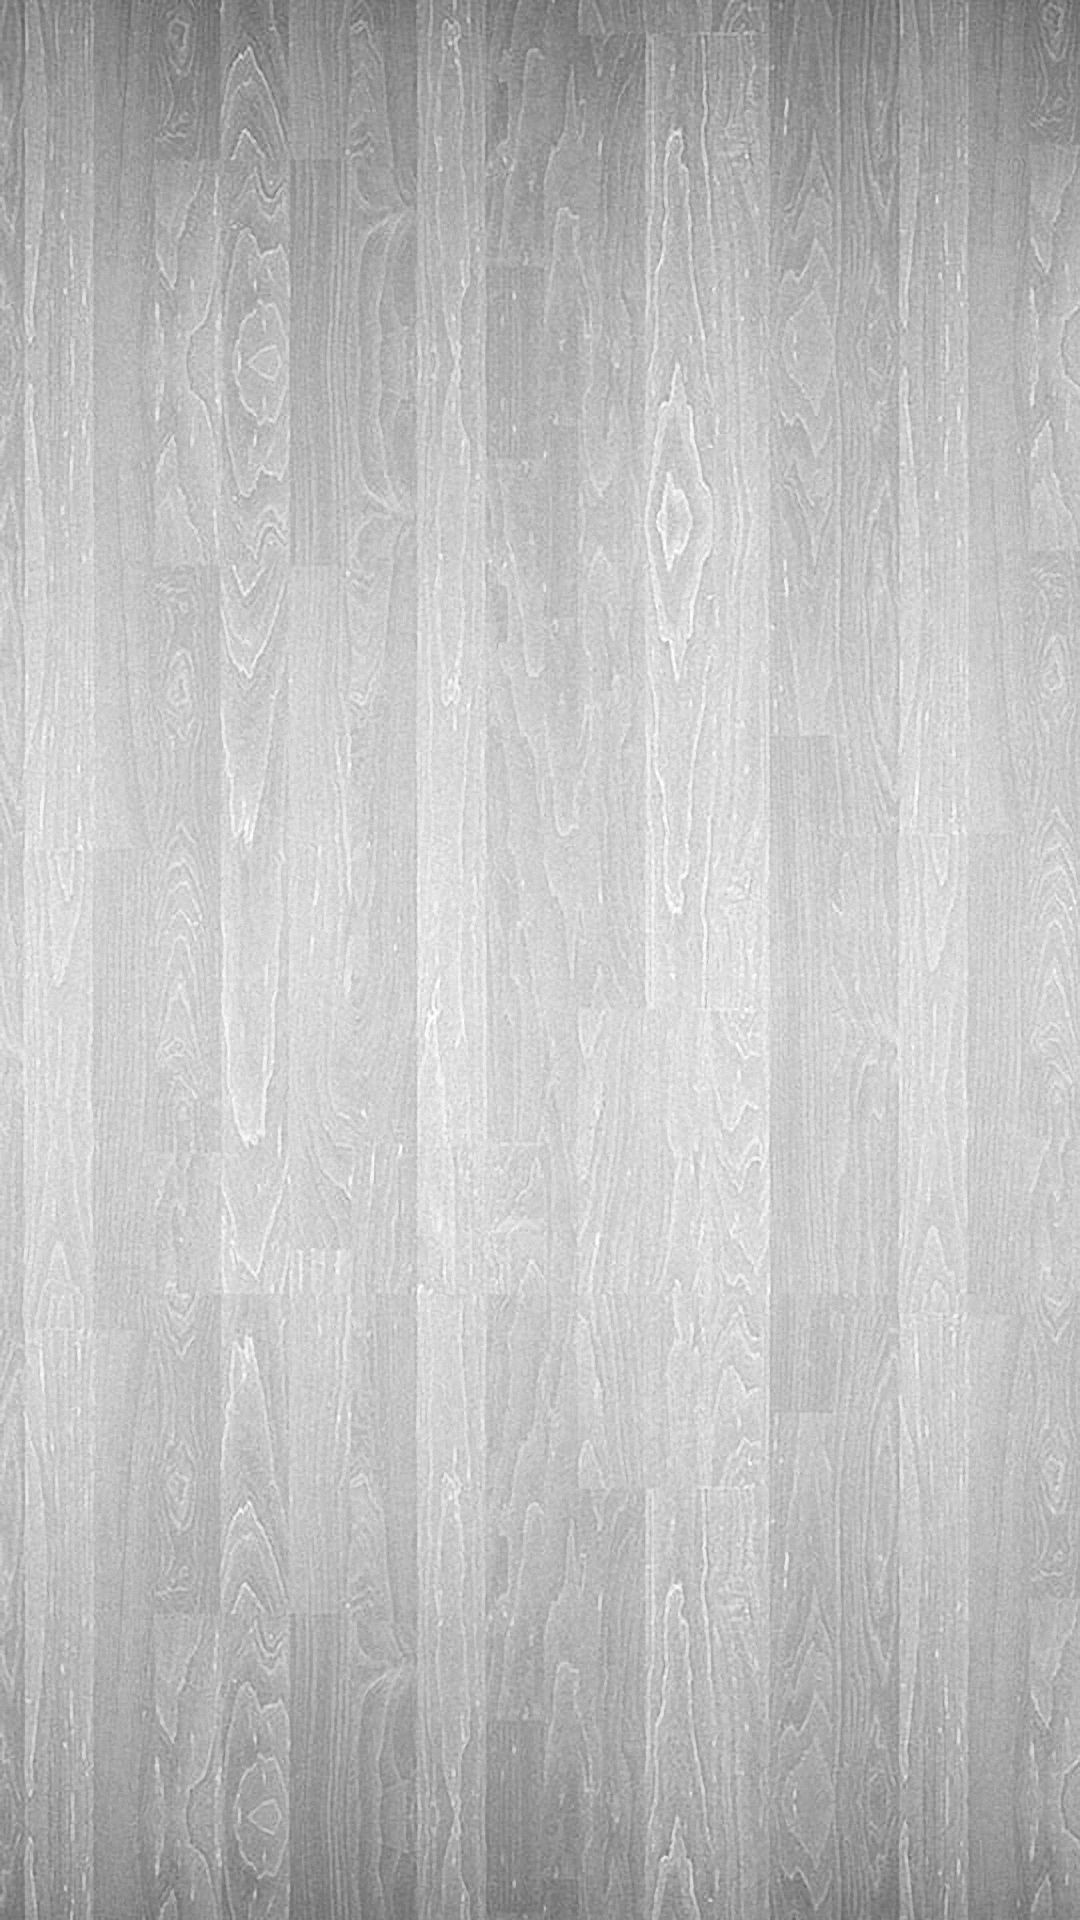 Clean Gray Wooden Texture htc one m8 Wallpapers HD 1080x1920